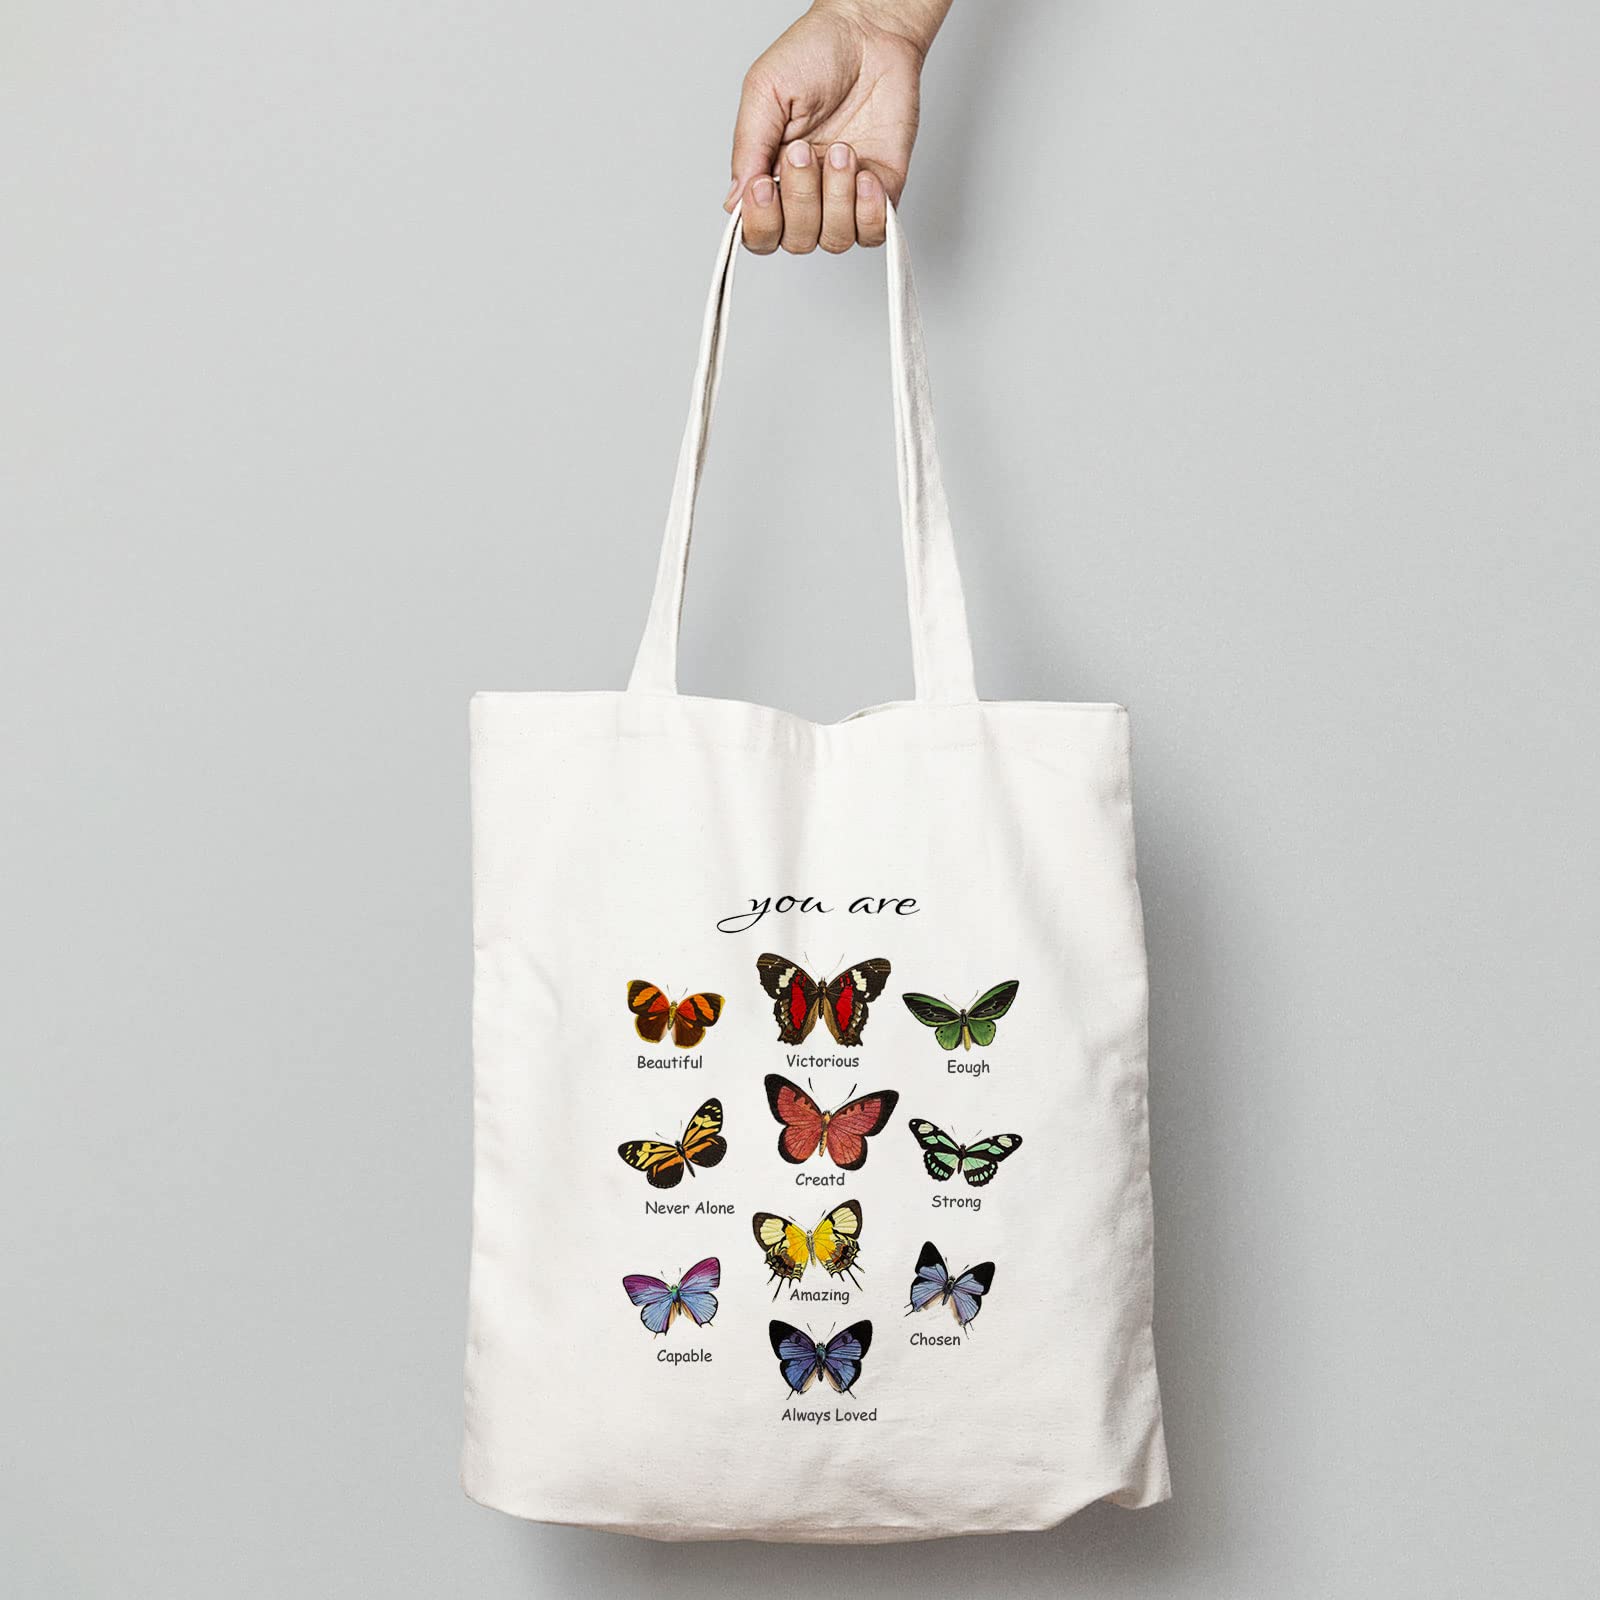 Yiminu.DS Butterfly Canvas Tote Bag for Women Small Tote Bag Aesthetic with Pockets，Cute Cloth Tote Bags Grocery Bag Cute Totebag，Cotton School Tote Bag for Summer Shopping